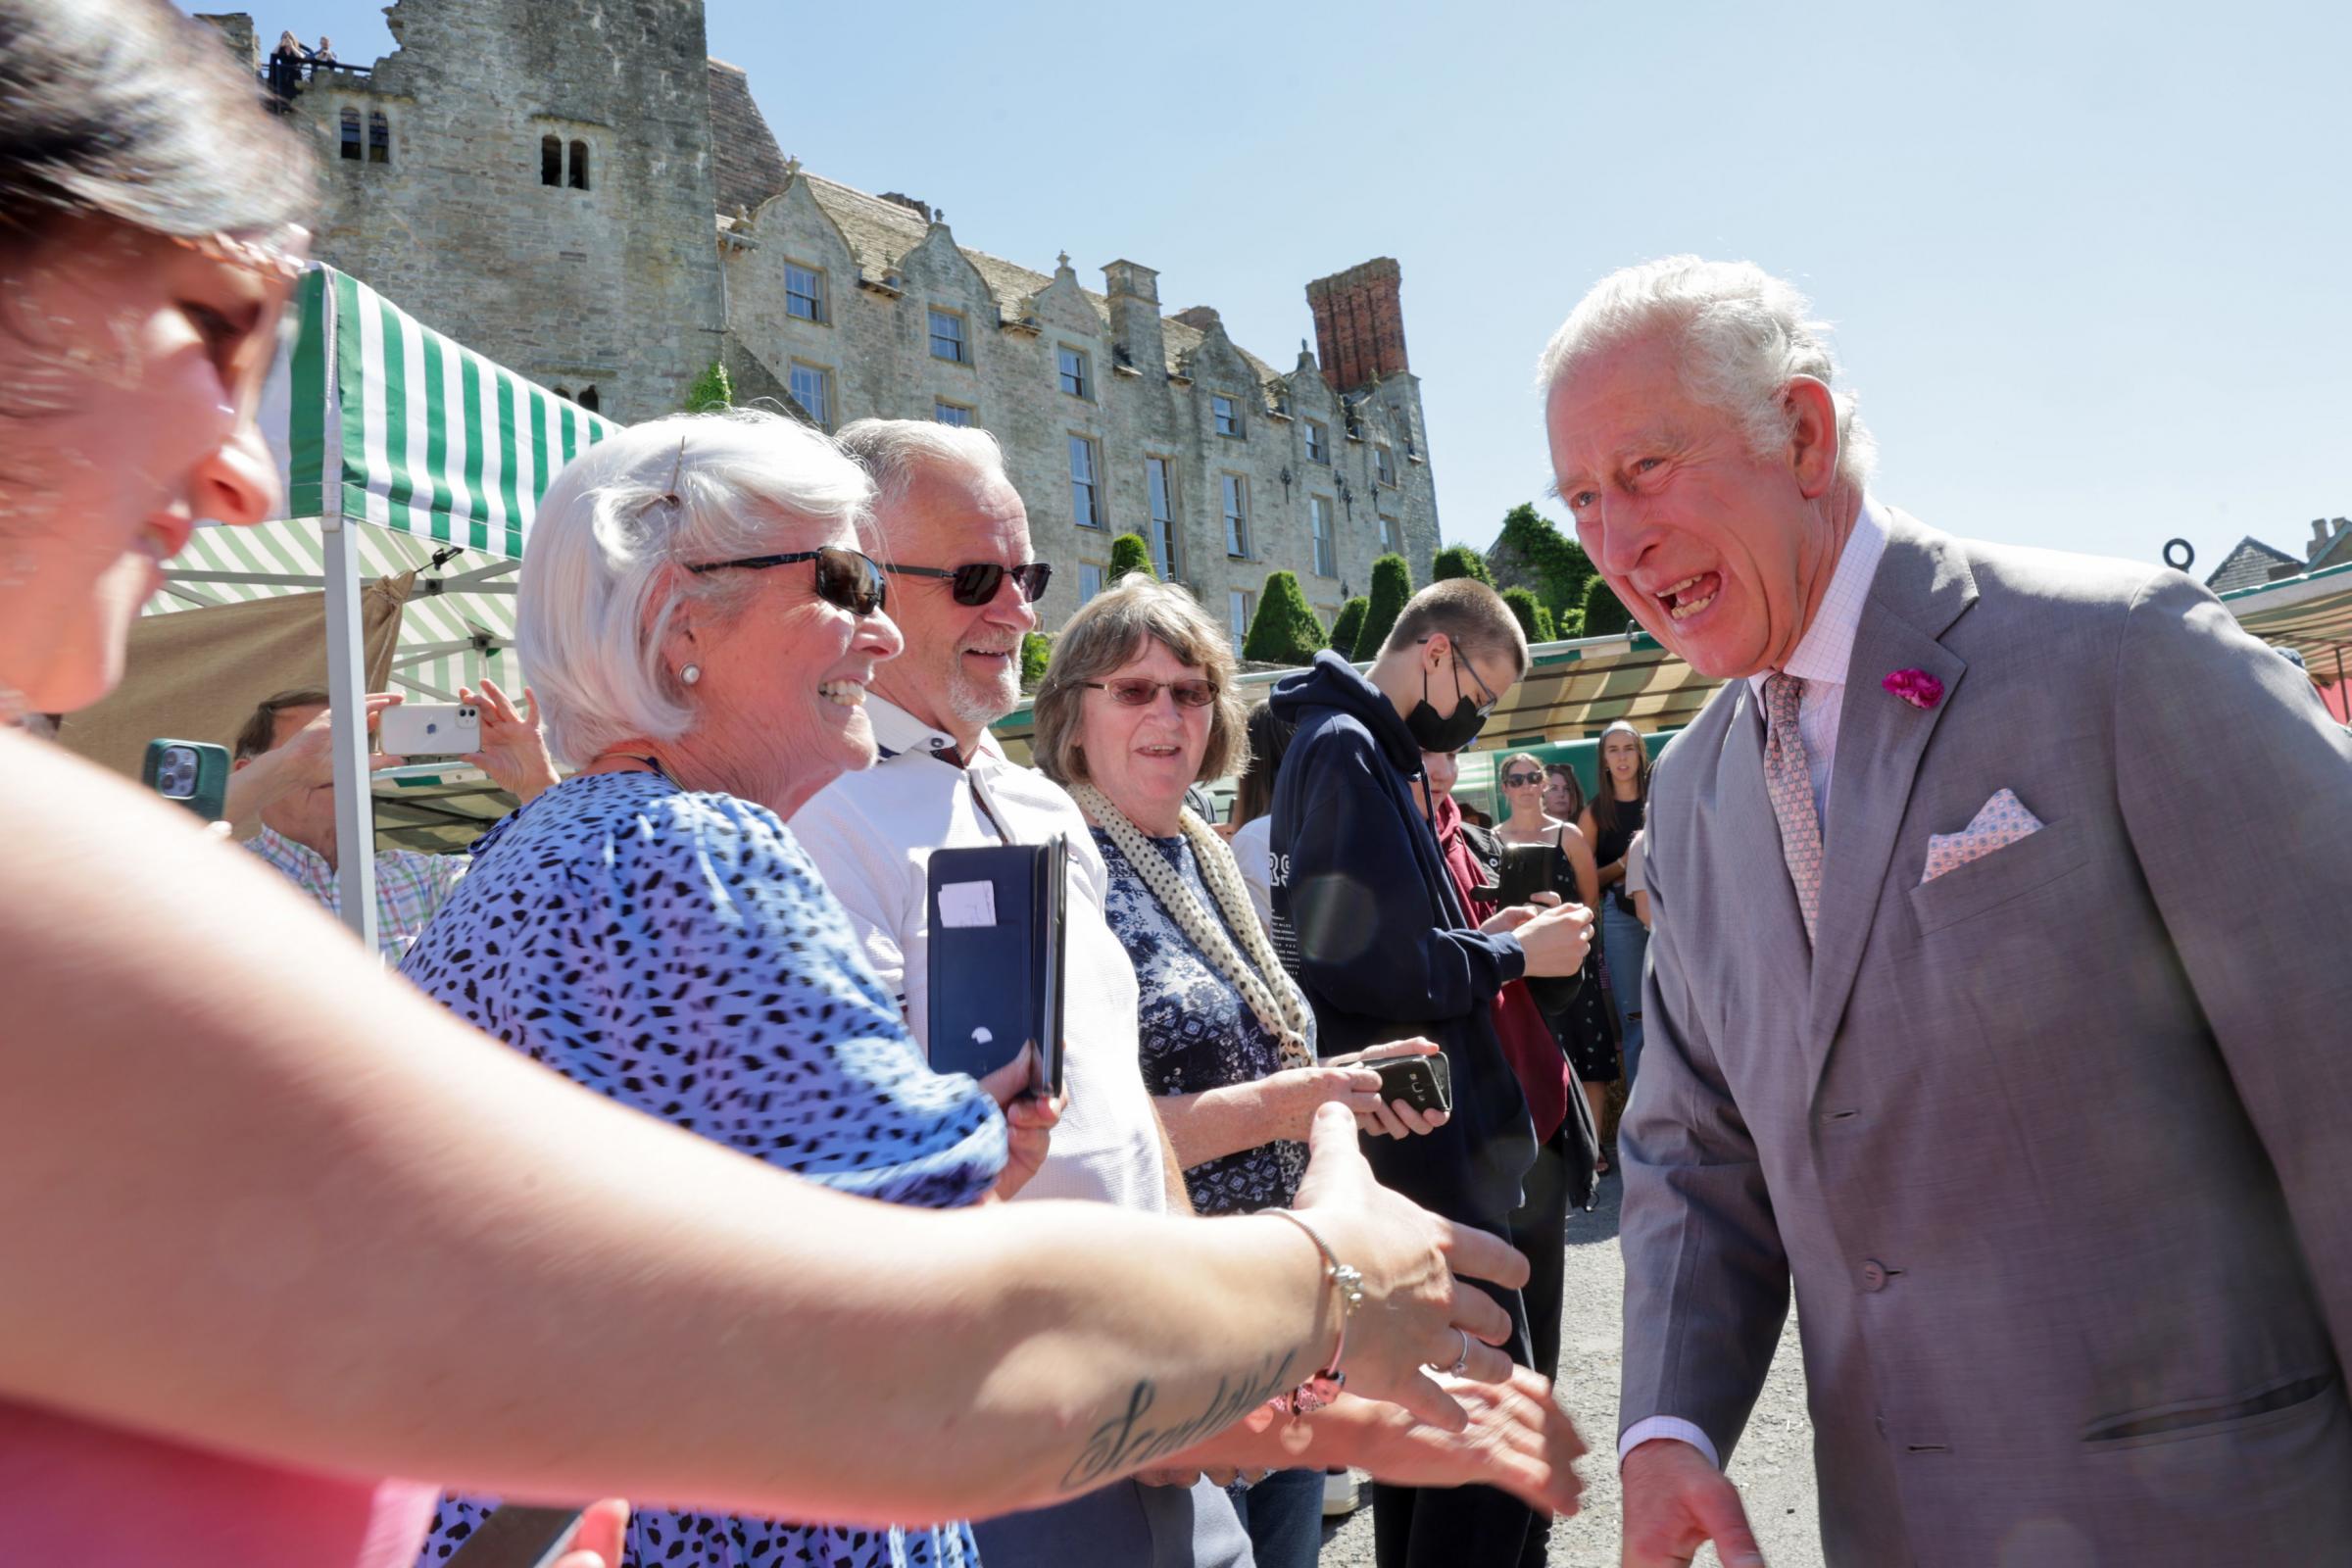 The Prince of Wales meets with members of the public during a visit to Hay Castle in Hay-on-Wye. Picture: Chris Jackson/PA Wire.